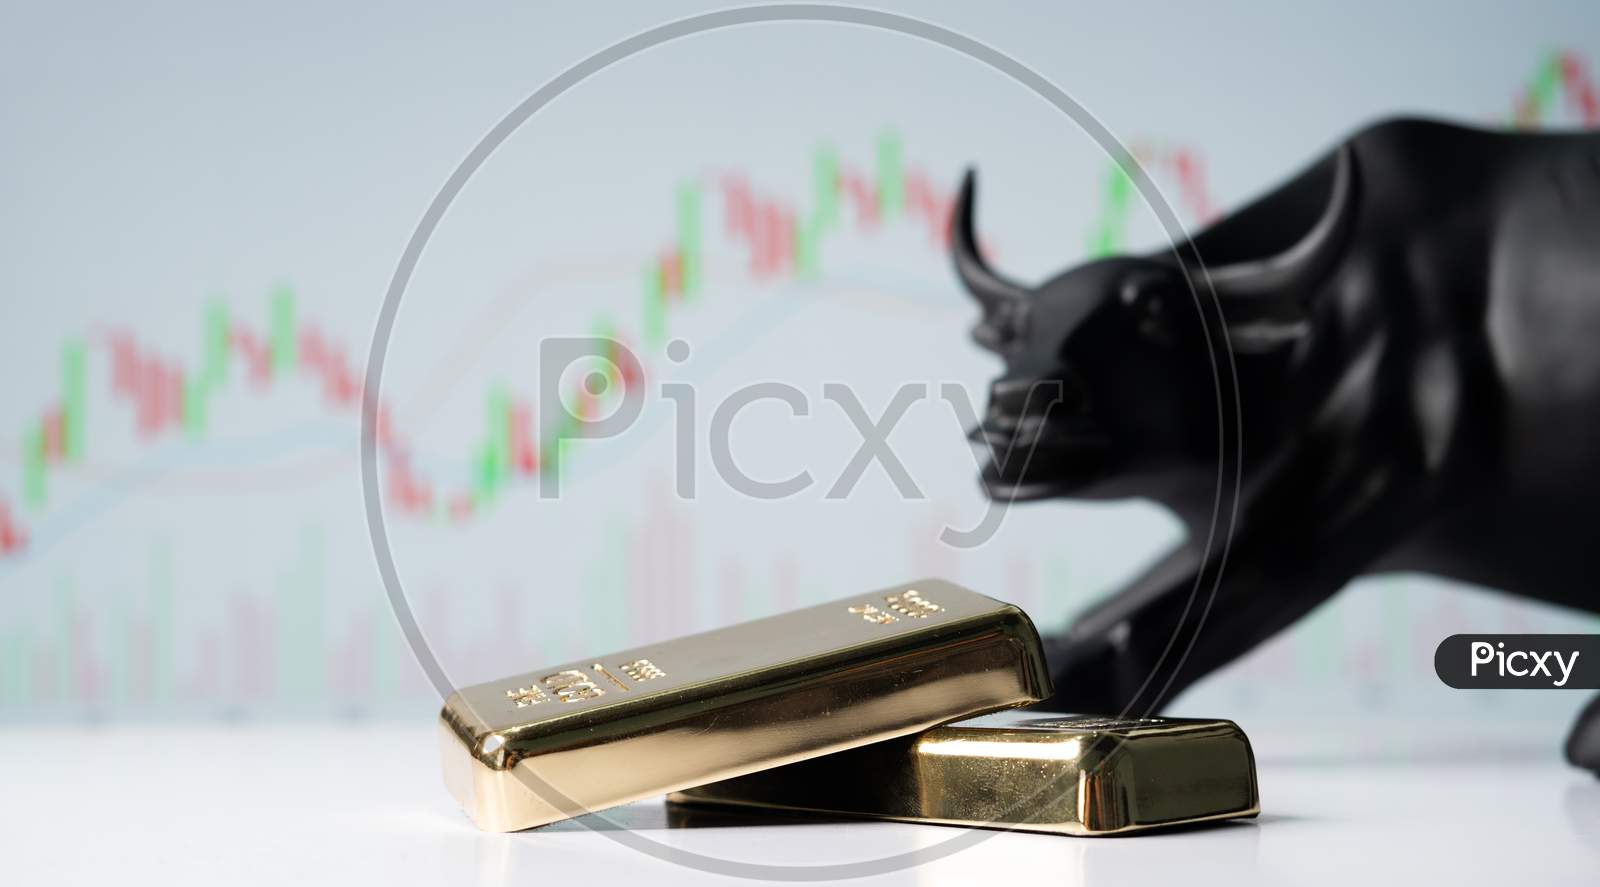 Focus On Gold Bars, Concept Of Bullish Or Boom In Gold Market Shares Or Stocks Showing By Bull Behind The Gold Bars With Charts In Background.